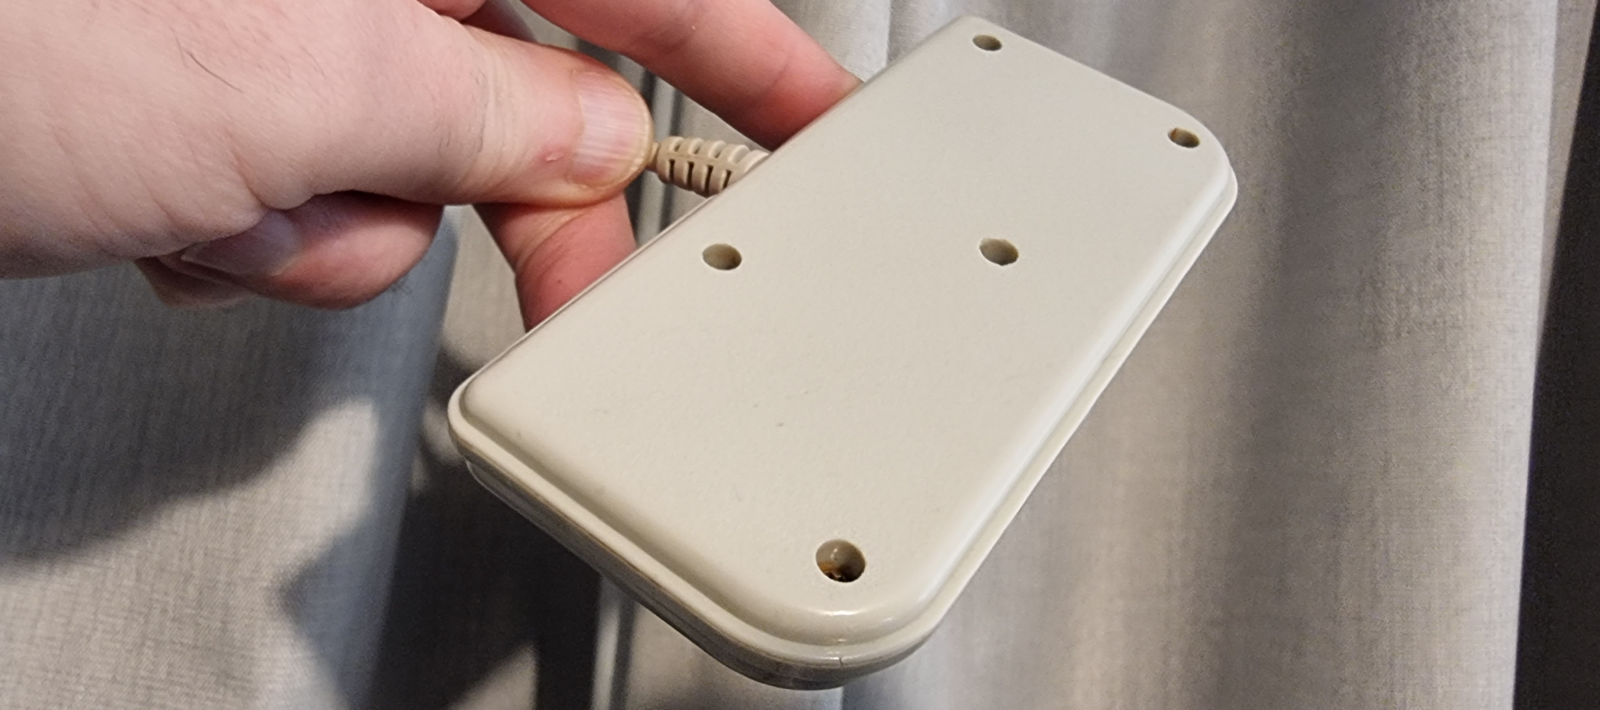 The image shows a hand holding the underside of a restored and cleaned Amstrad GX4000 game controller, displaying the screw holes for internal access and the clean, off-white finish of the controller's casing.